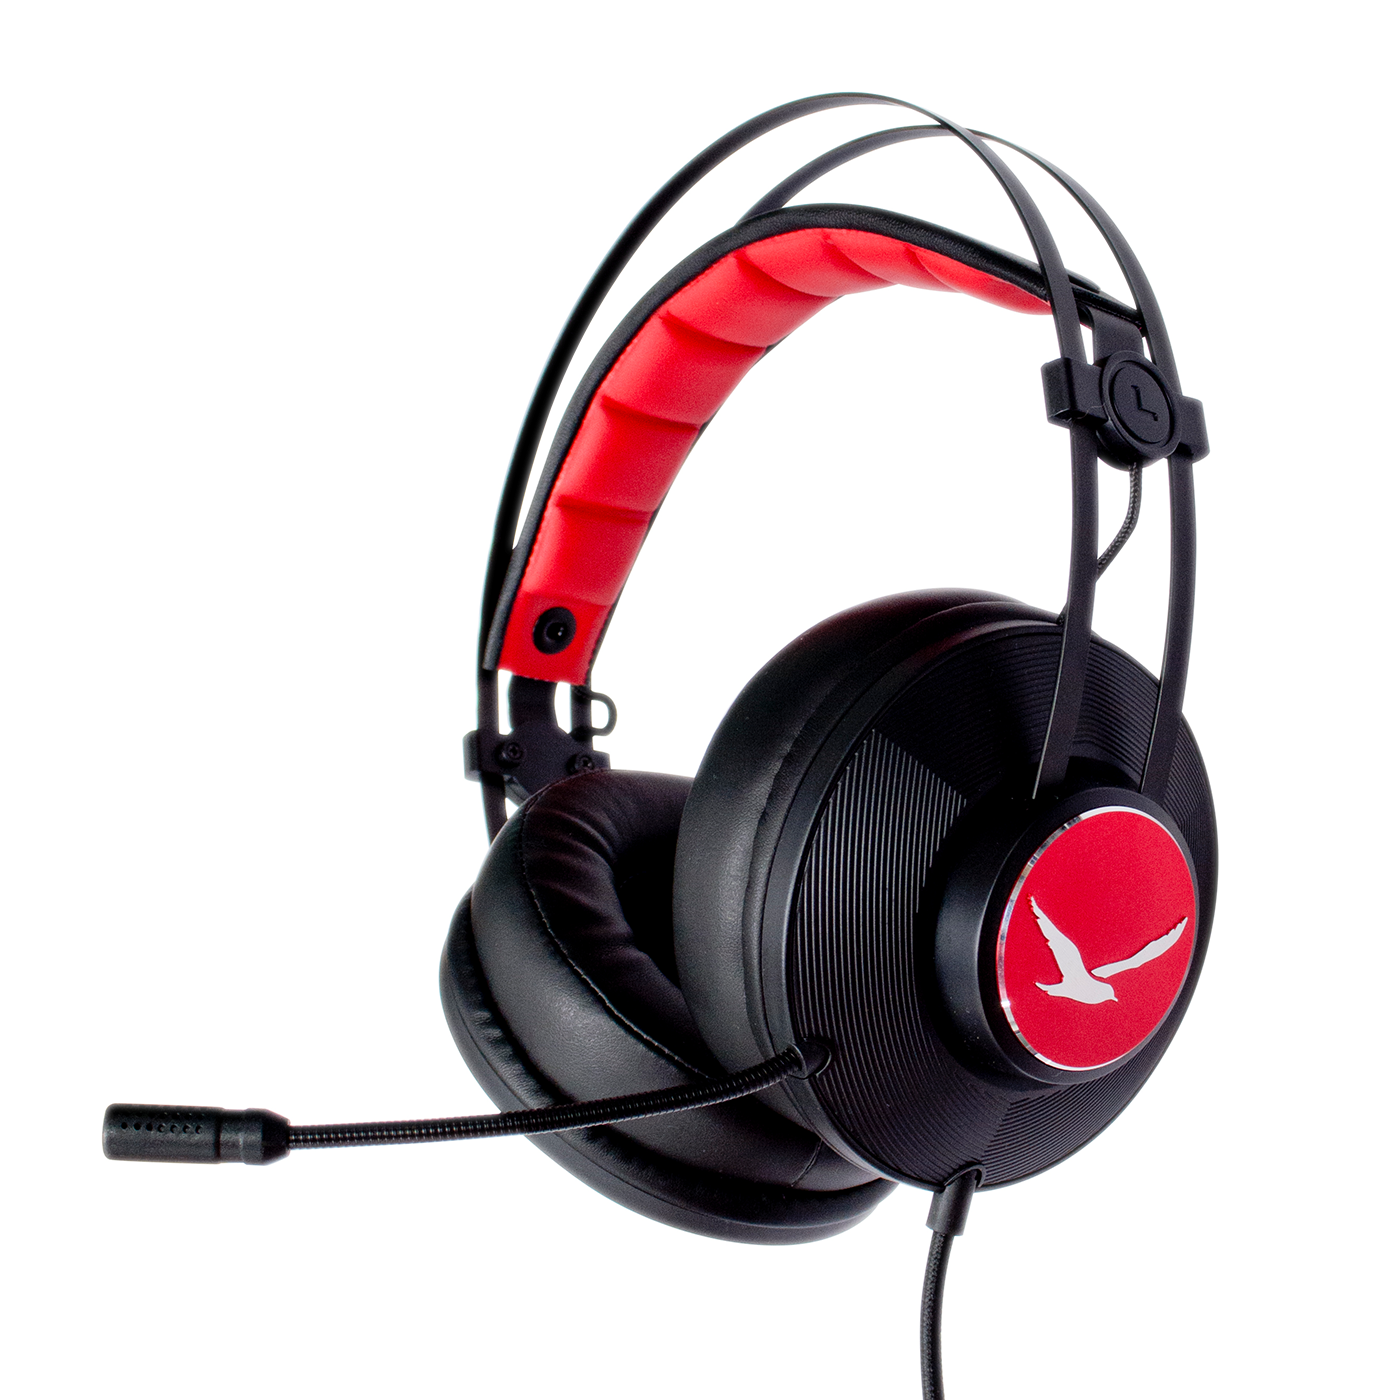 Digifast Headset Apollo Series X2, Lightweight, Noise-Canceling Adjustable Microphone, Remote Vol/Mic Control, Plug & Play, 3.5 mm audio jack